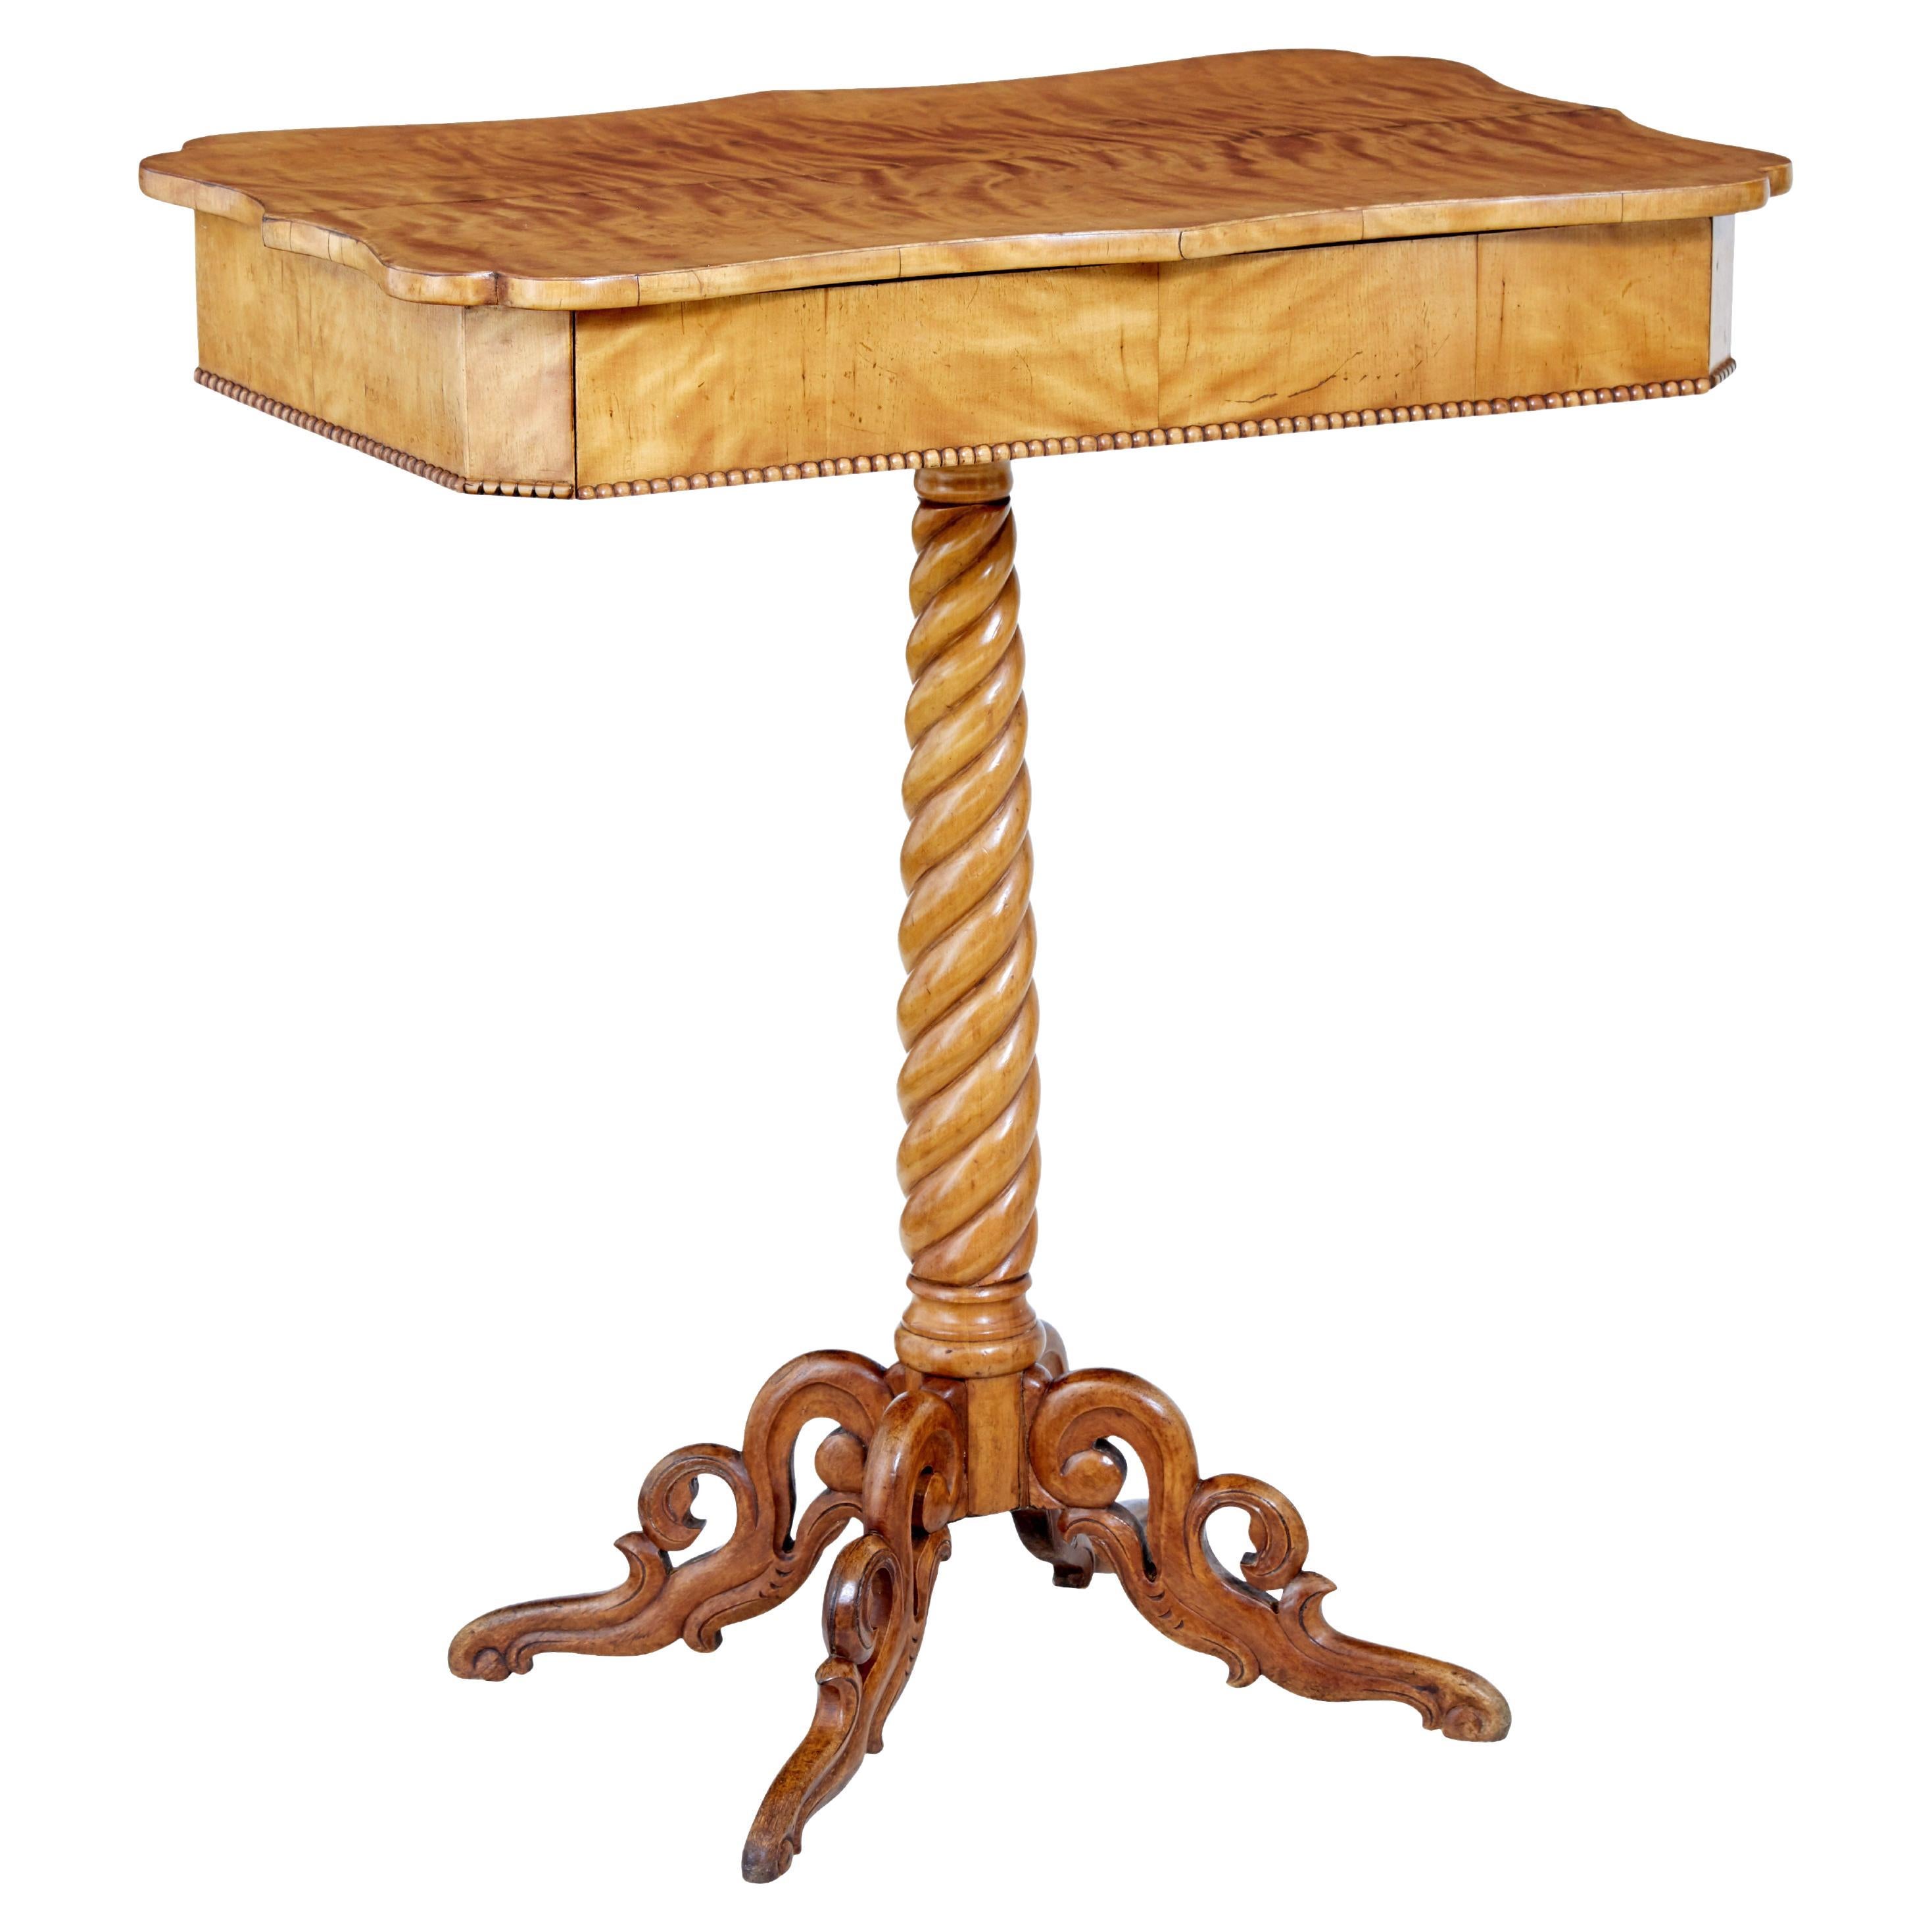 Swedish 19th century carved birch side table